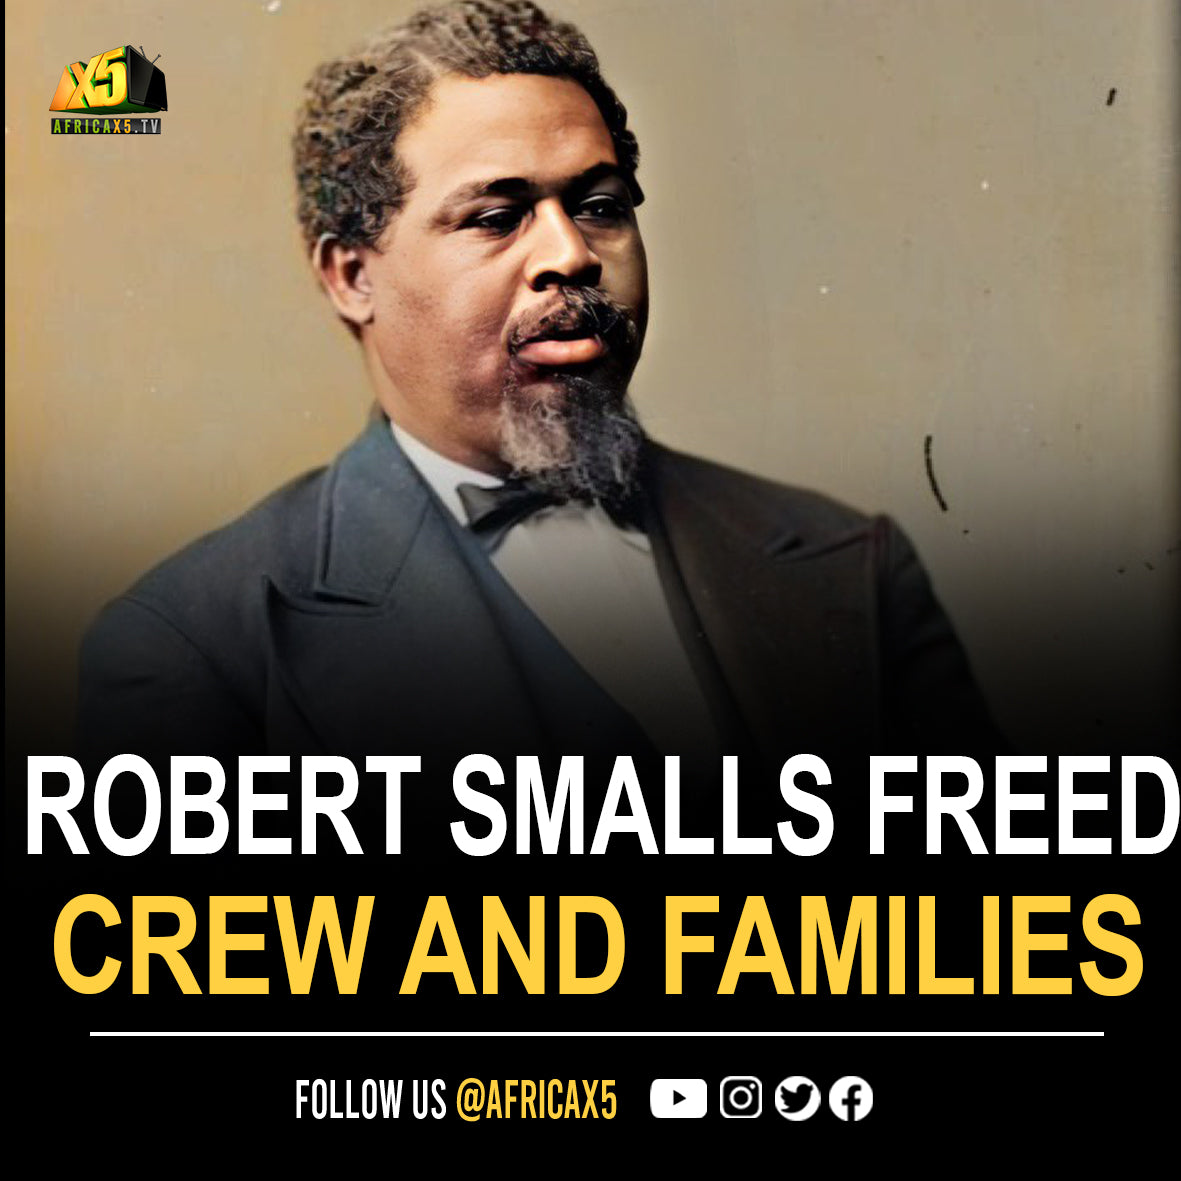 Robert Smalls stole a Confederate Ship and sailed it to Freedom disguised as a captain, freeing his crew and their families.